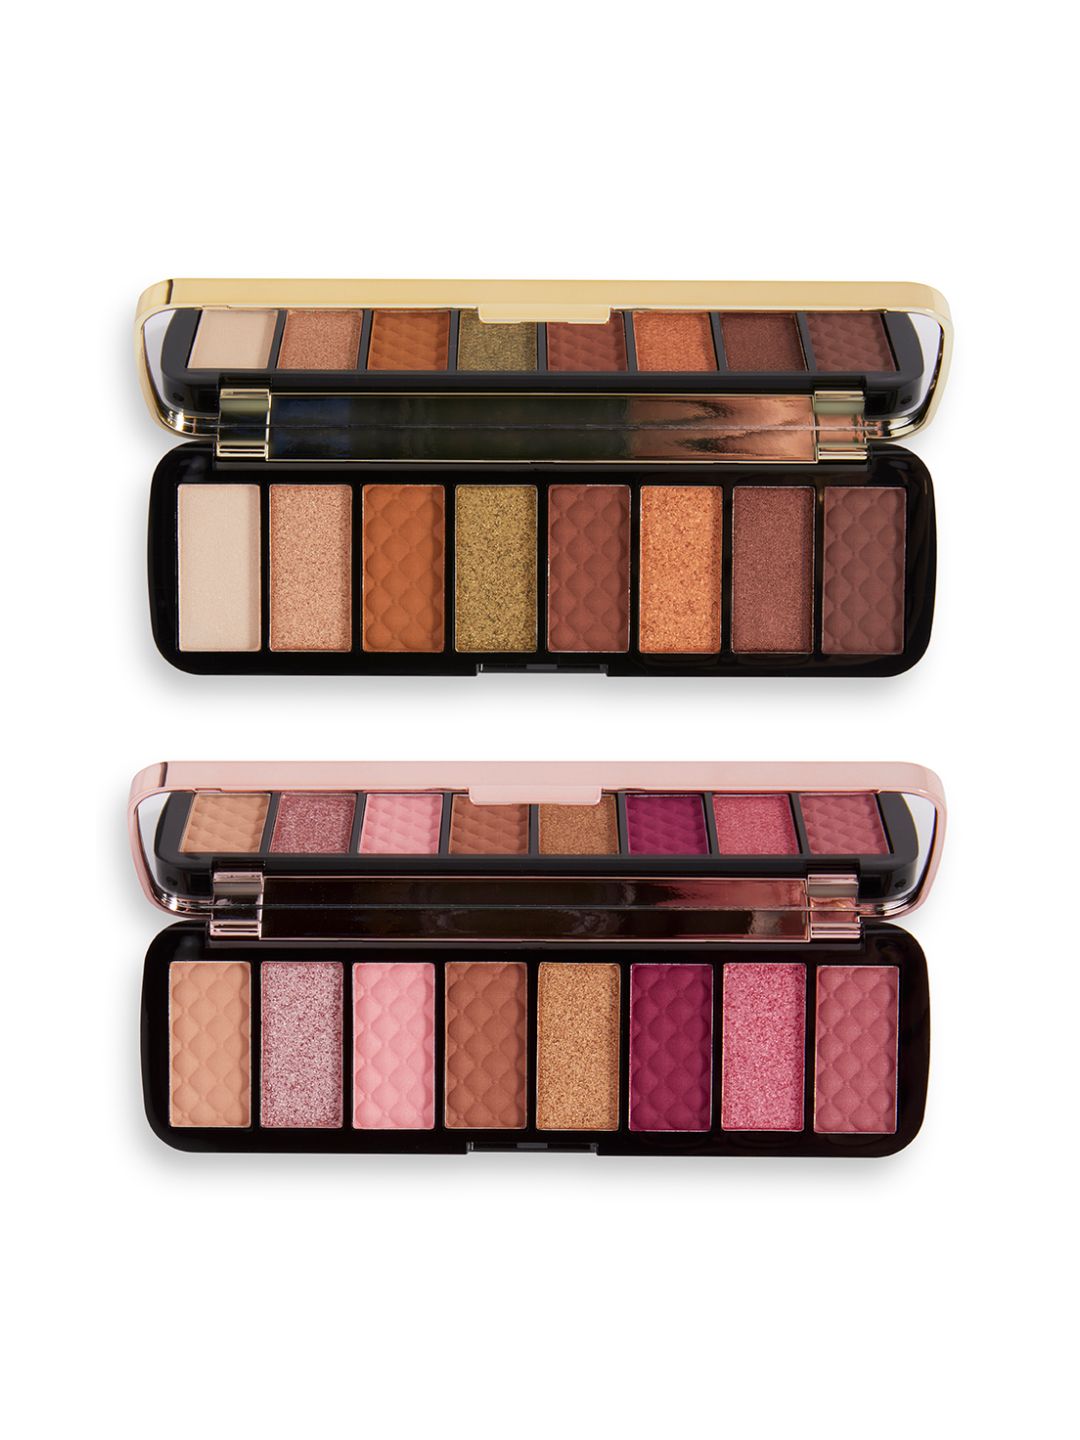 Makeup Revolution London Soft Glamour Duo Palette Set - Soft Radiance & Soft Luxe Price in India